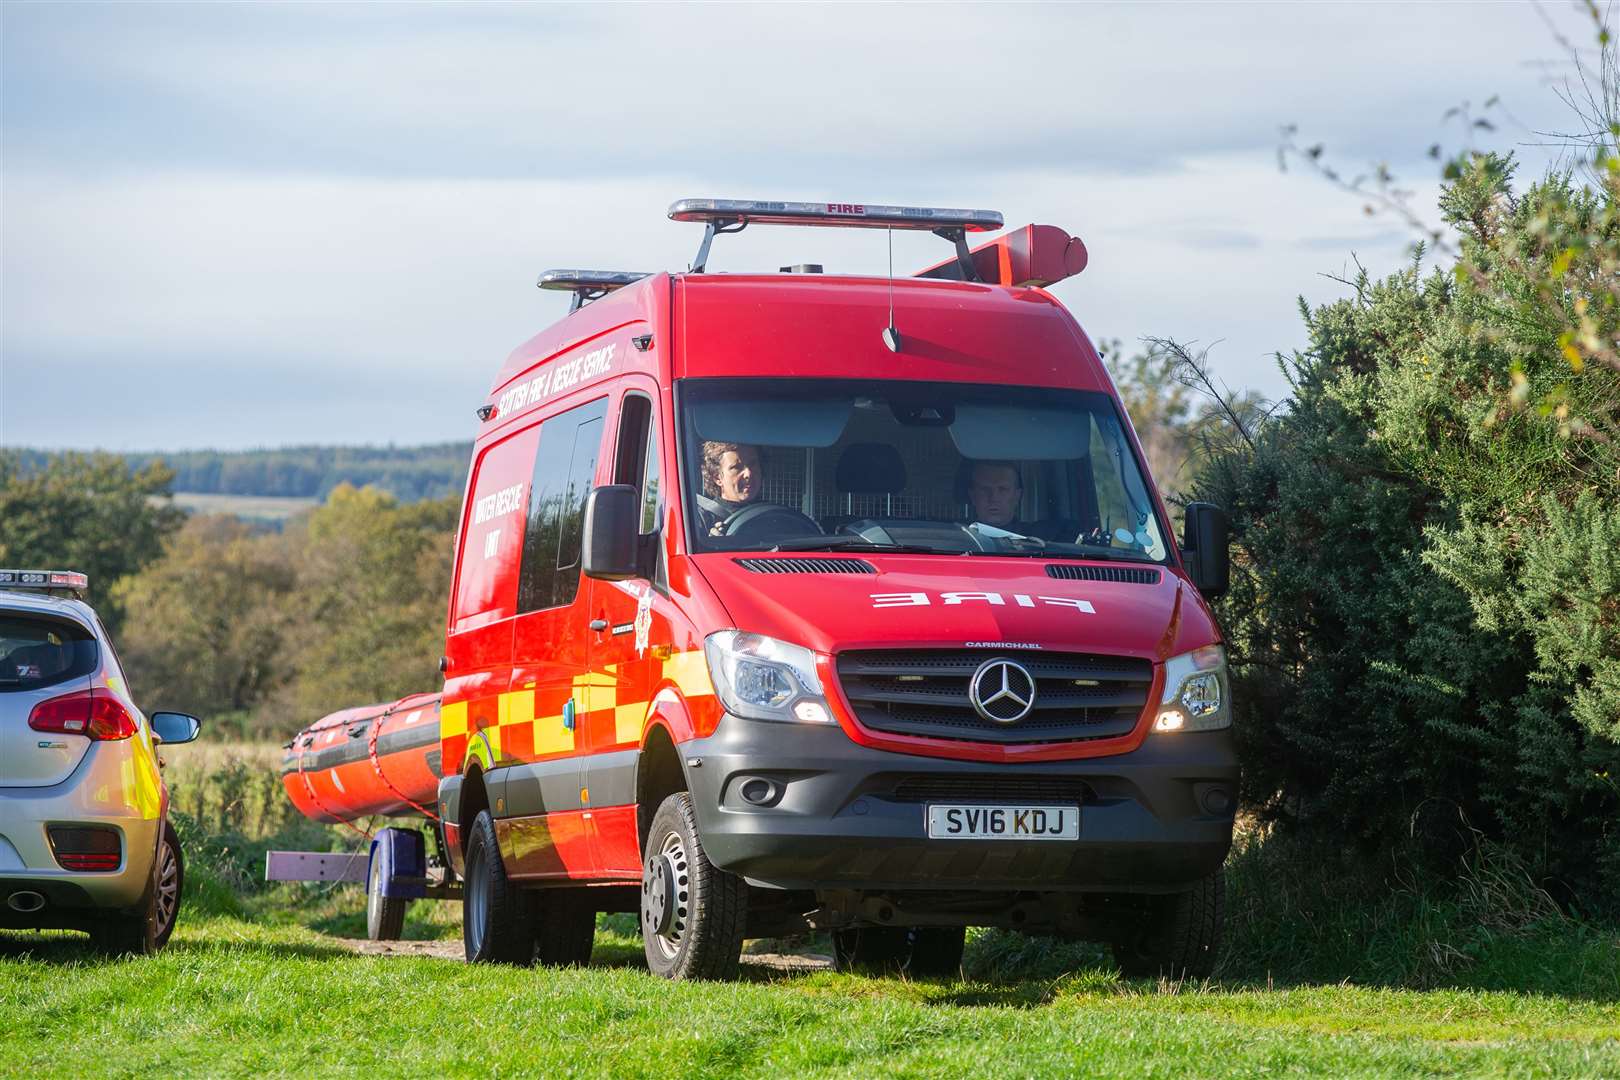 The Fire Service's water rescue unit, similar to the one pictured, joined the multi-agency effort to recover the body. Picture: Daniel Forsyth